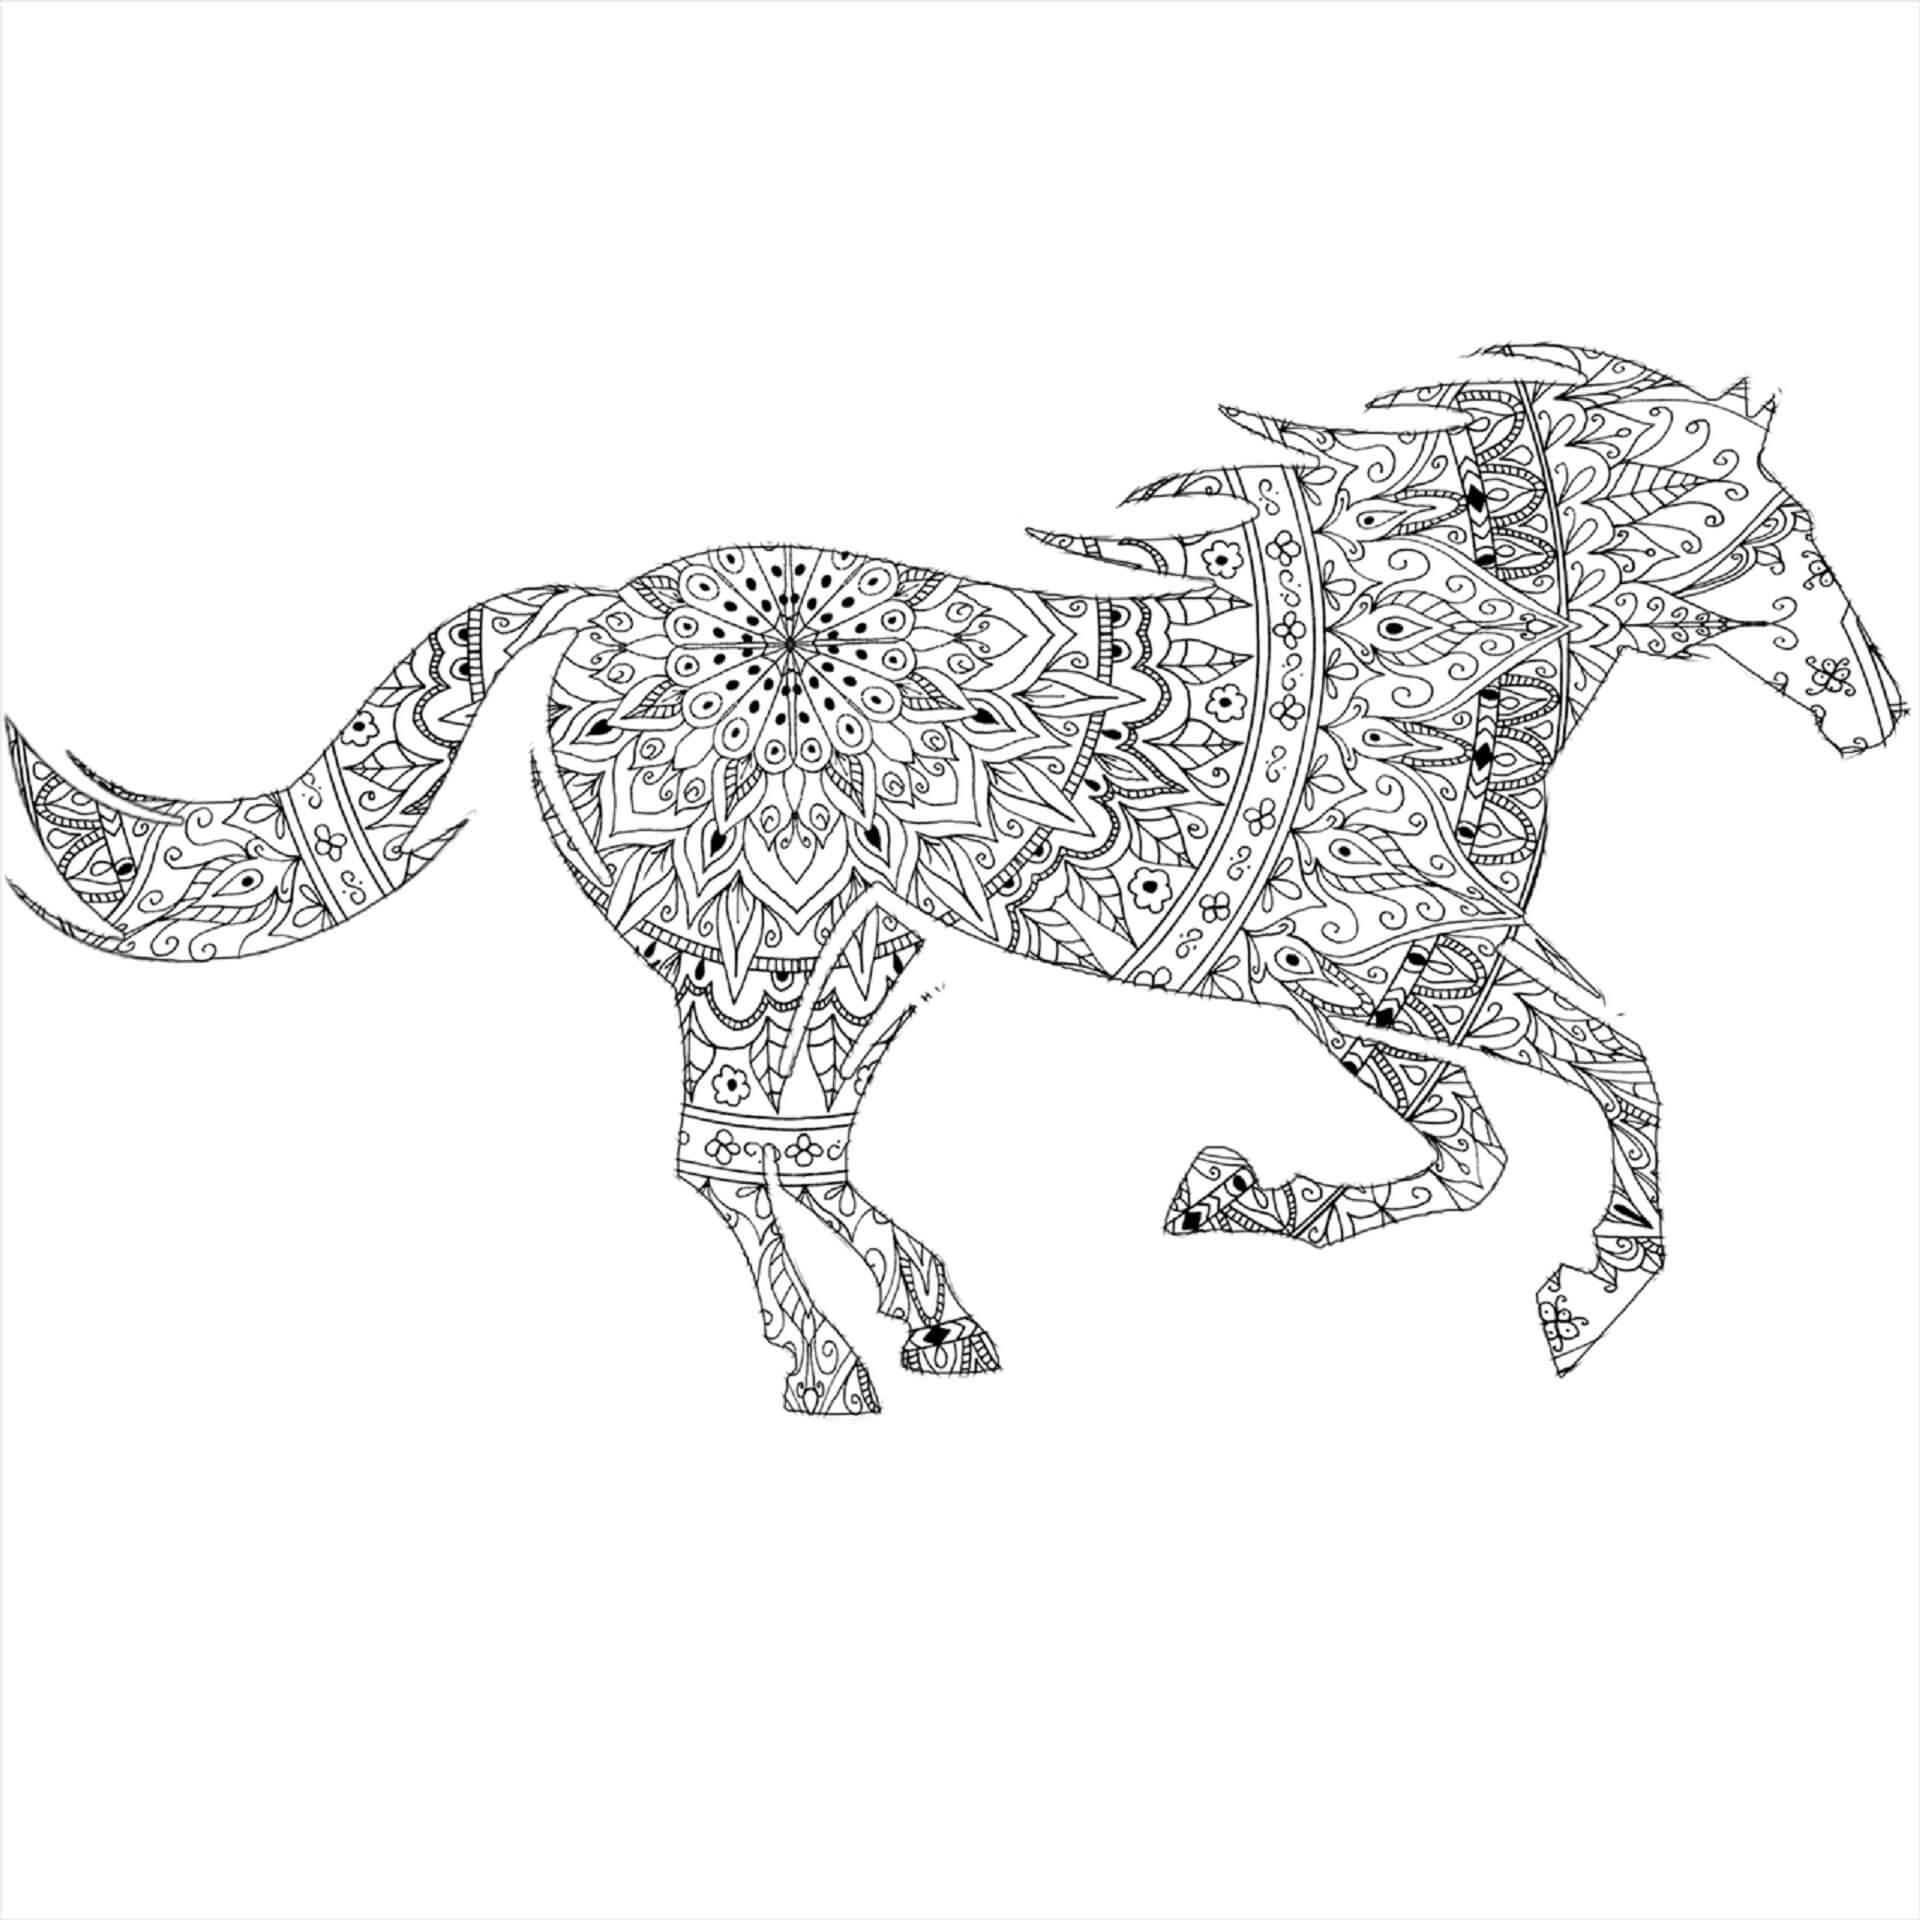 Normal Horse Mandala coloring page - Download, Print or Color Online ...